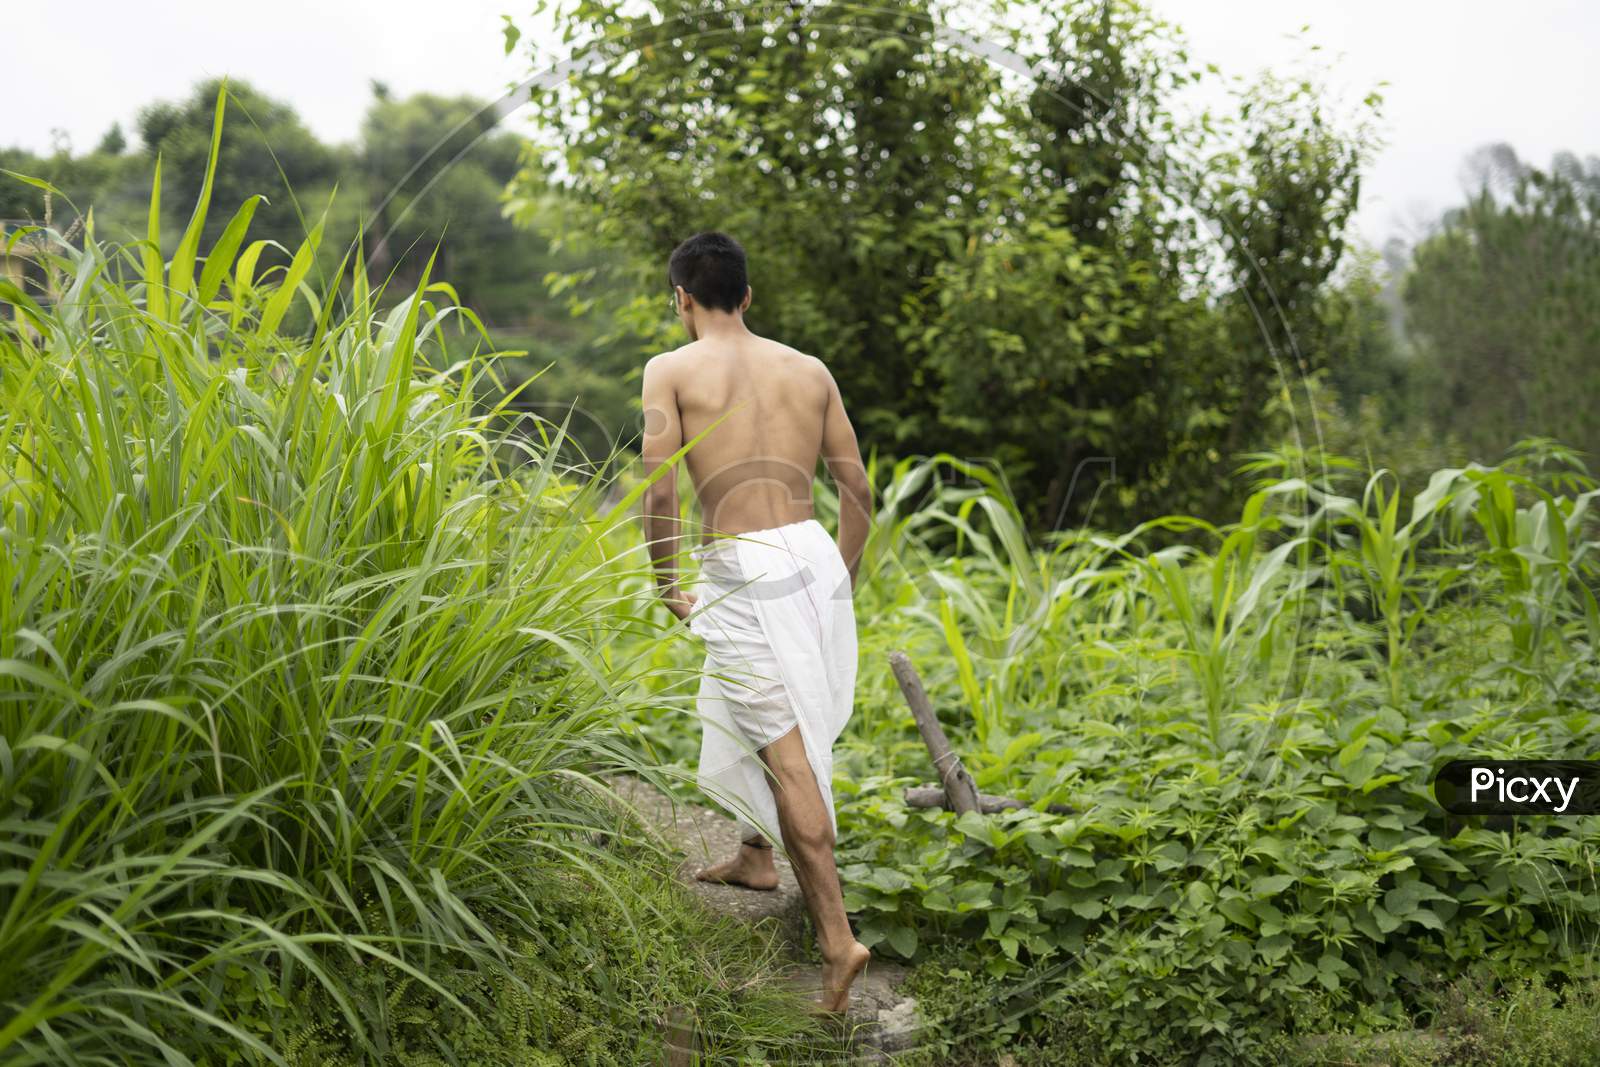 Young Indian Fit Boy, Walking On A Pathway Beside Crops In The Field. An Indian Priest Walking While Wearing White Dhoti. Indian Religious Man.